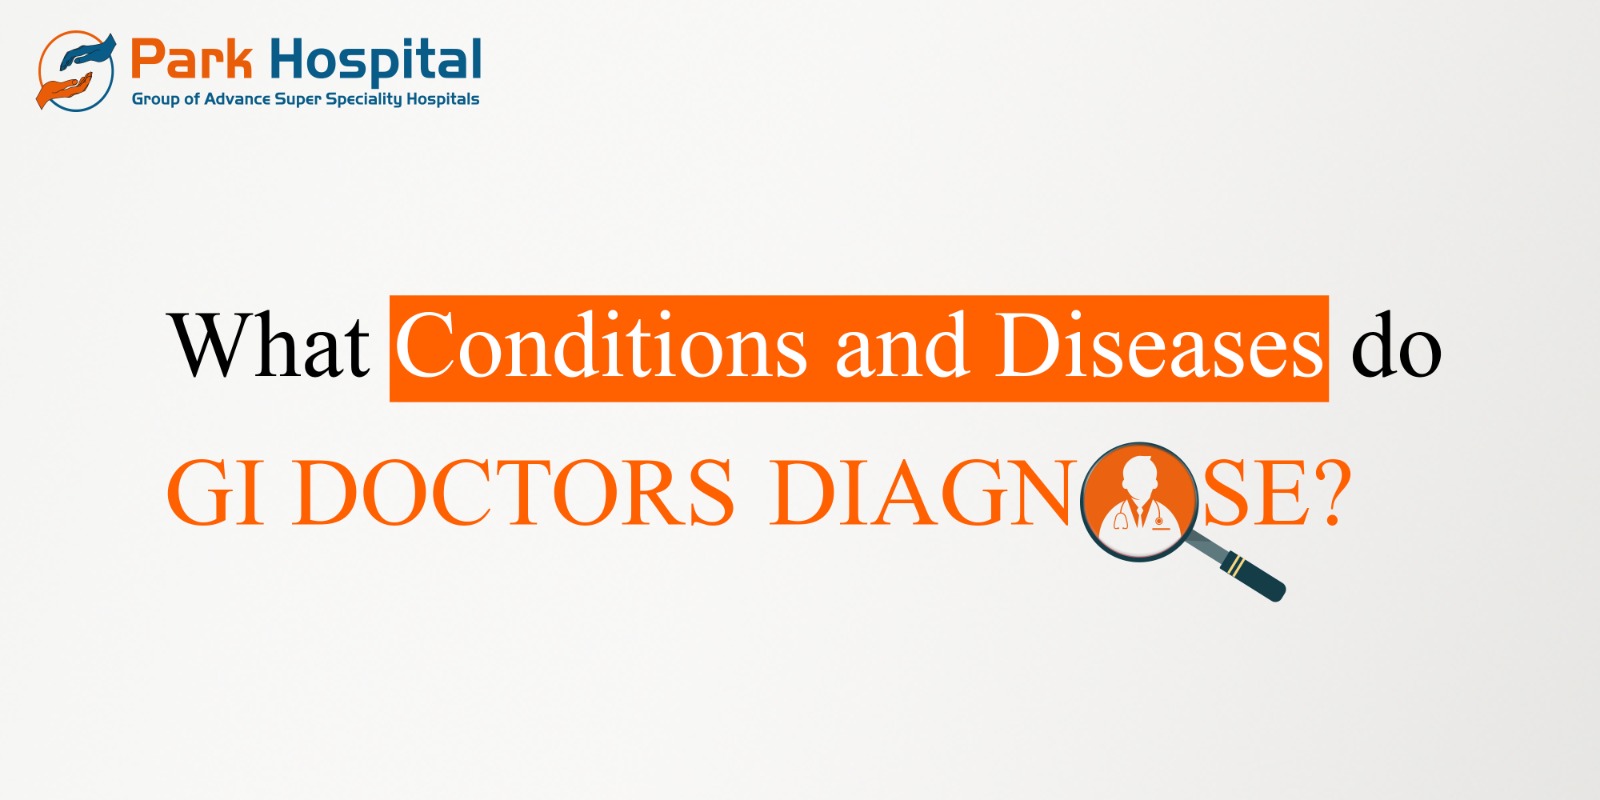 WHAT CONDITIONS AND DISEASES DO GI DOCTORS DIAGNOSE?